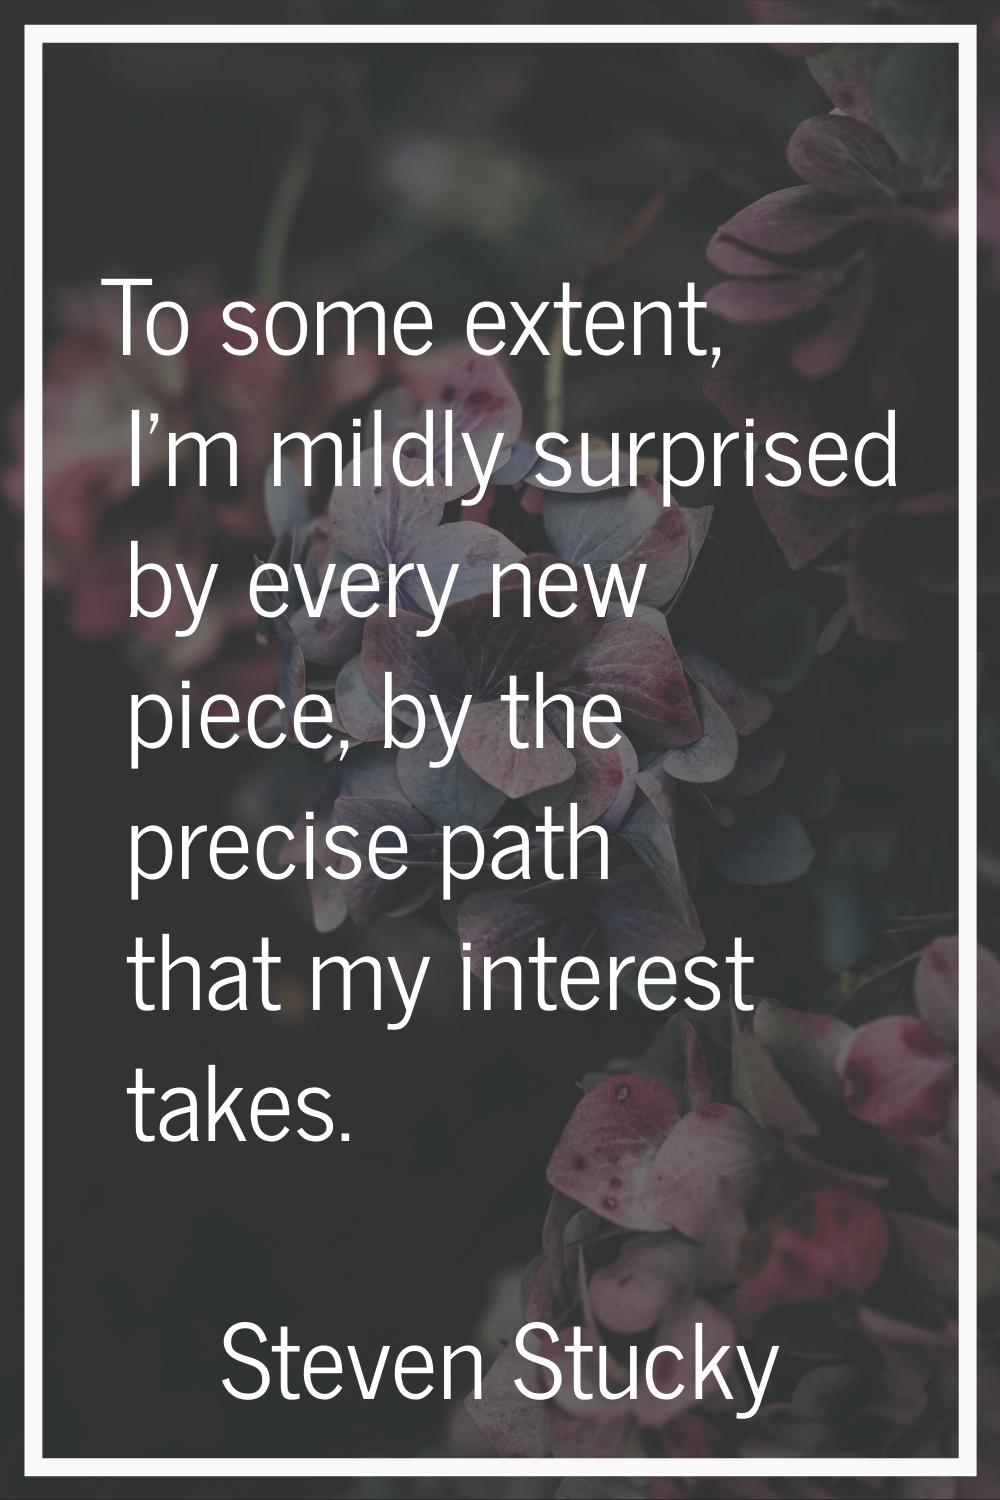 To some extent, I'm mildly surprised by every new piece, by the precise path that my interest takes